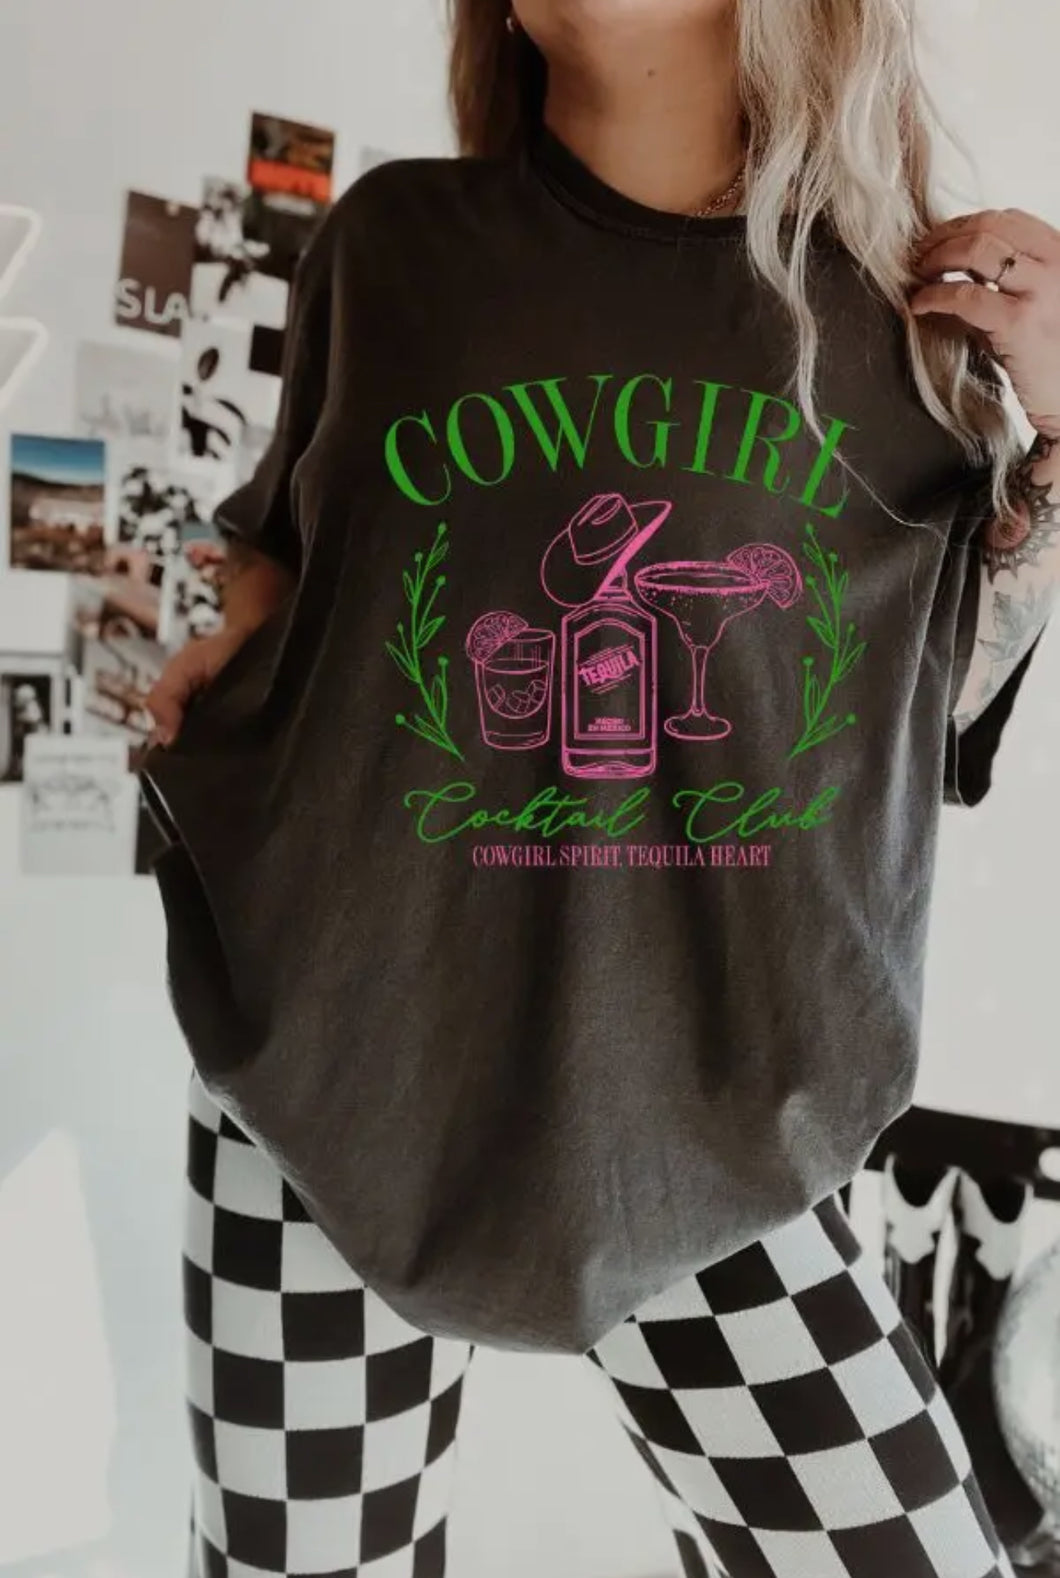 Cowgirl Cocktail Tee